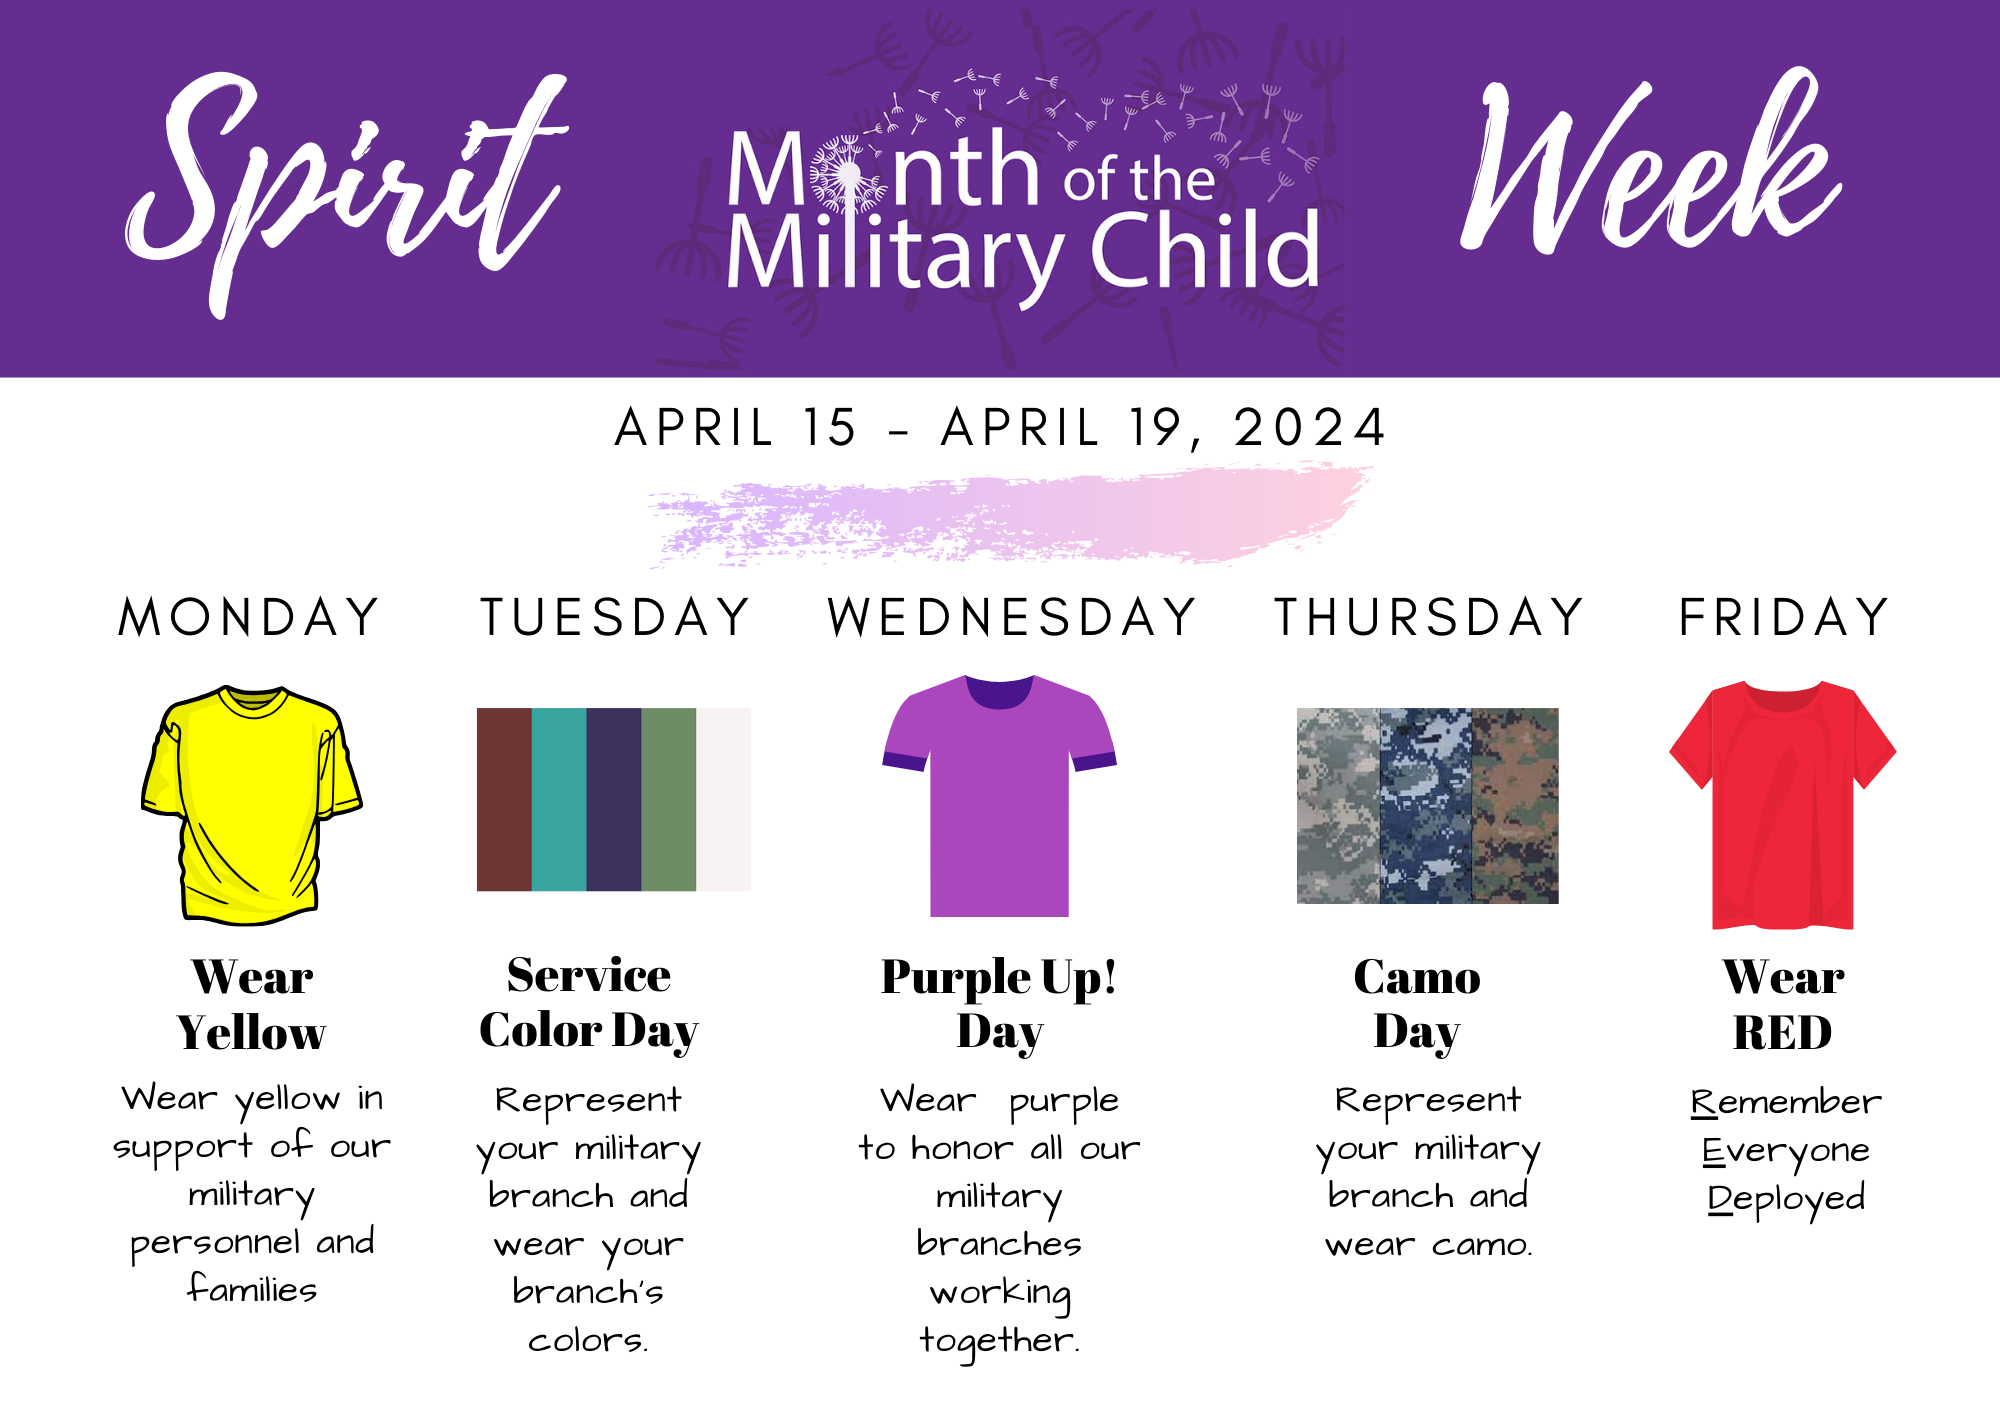 Flyer containing events for MOMC spirit week